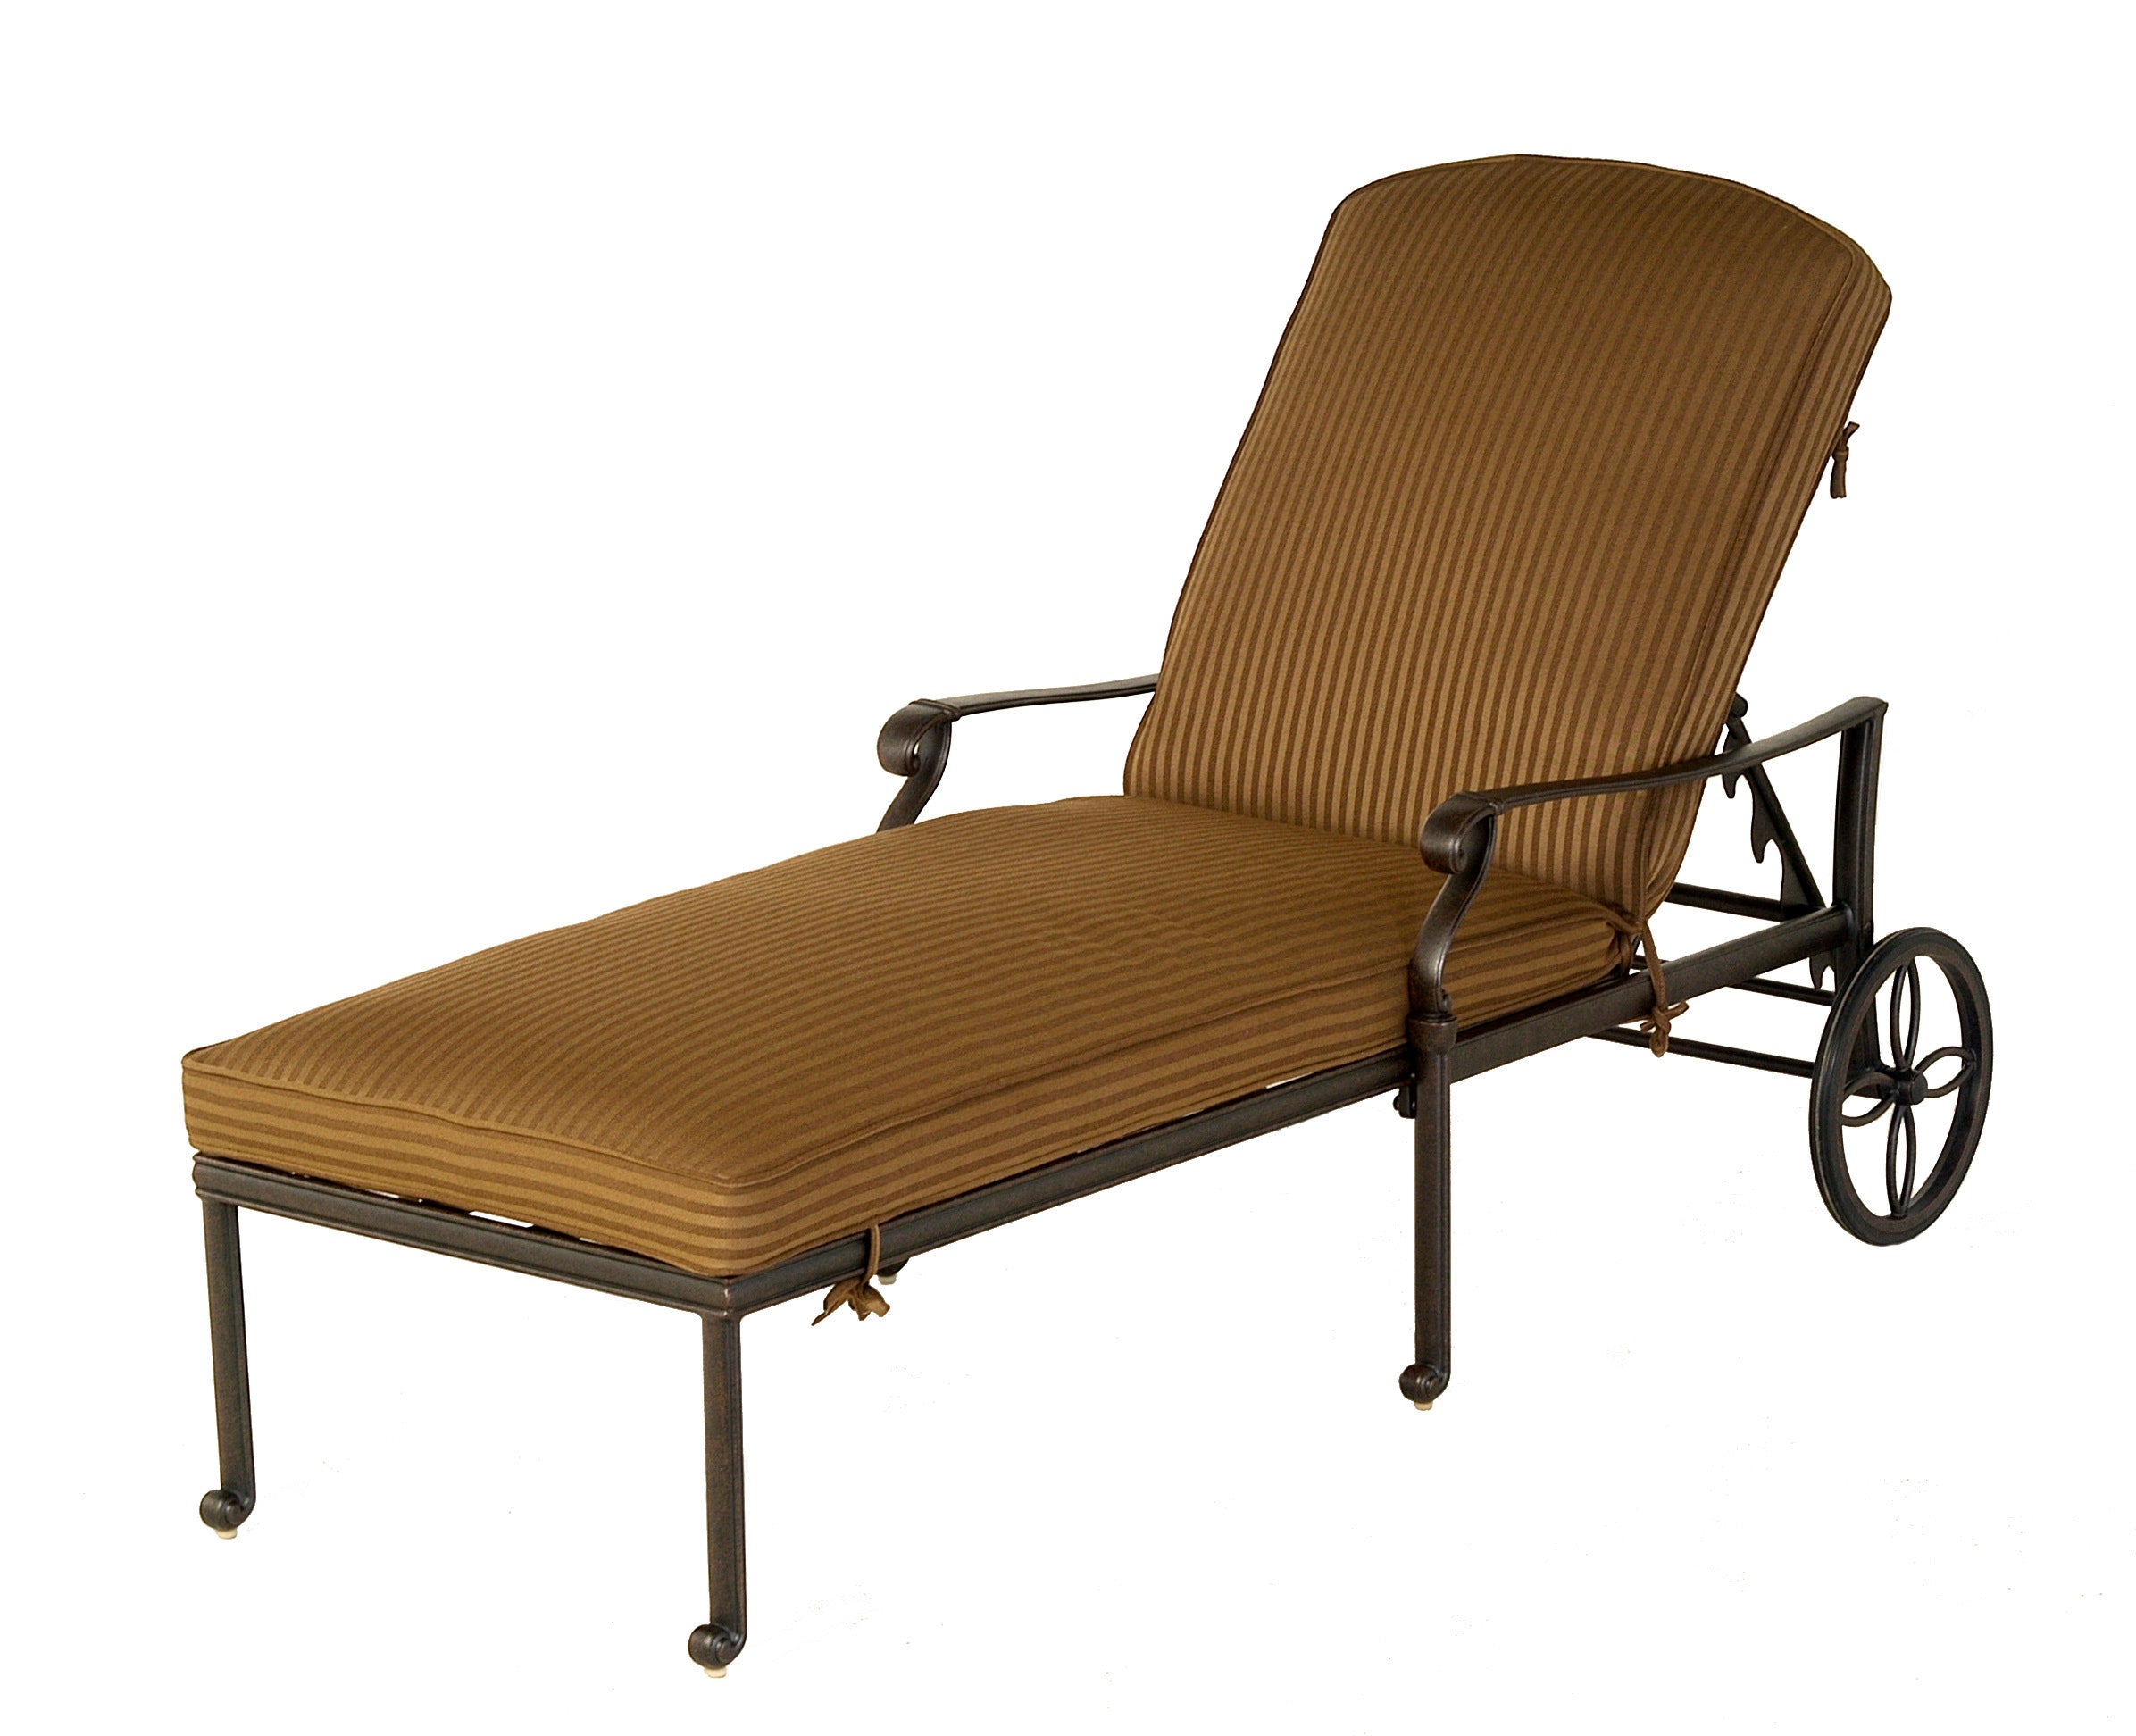 Mayfair Chaise Lounger With Cushion by Hanamint